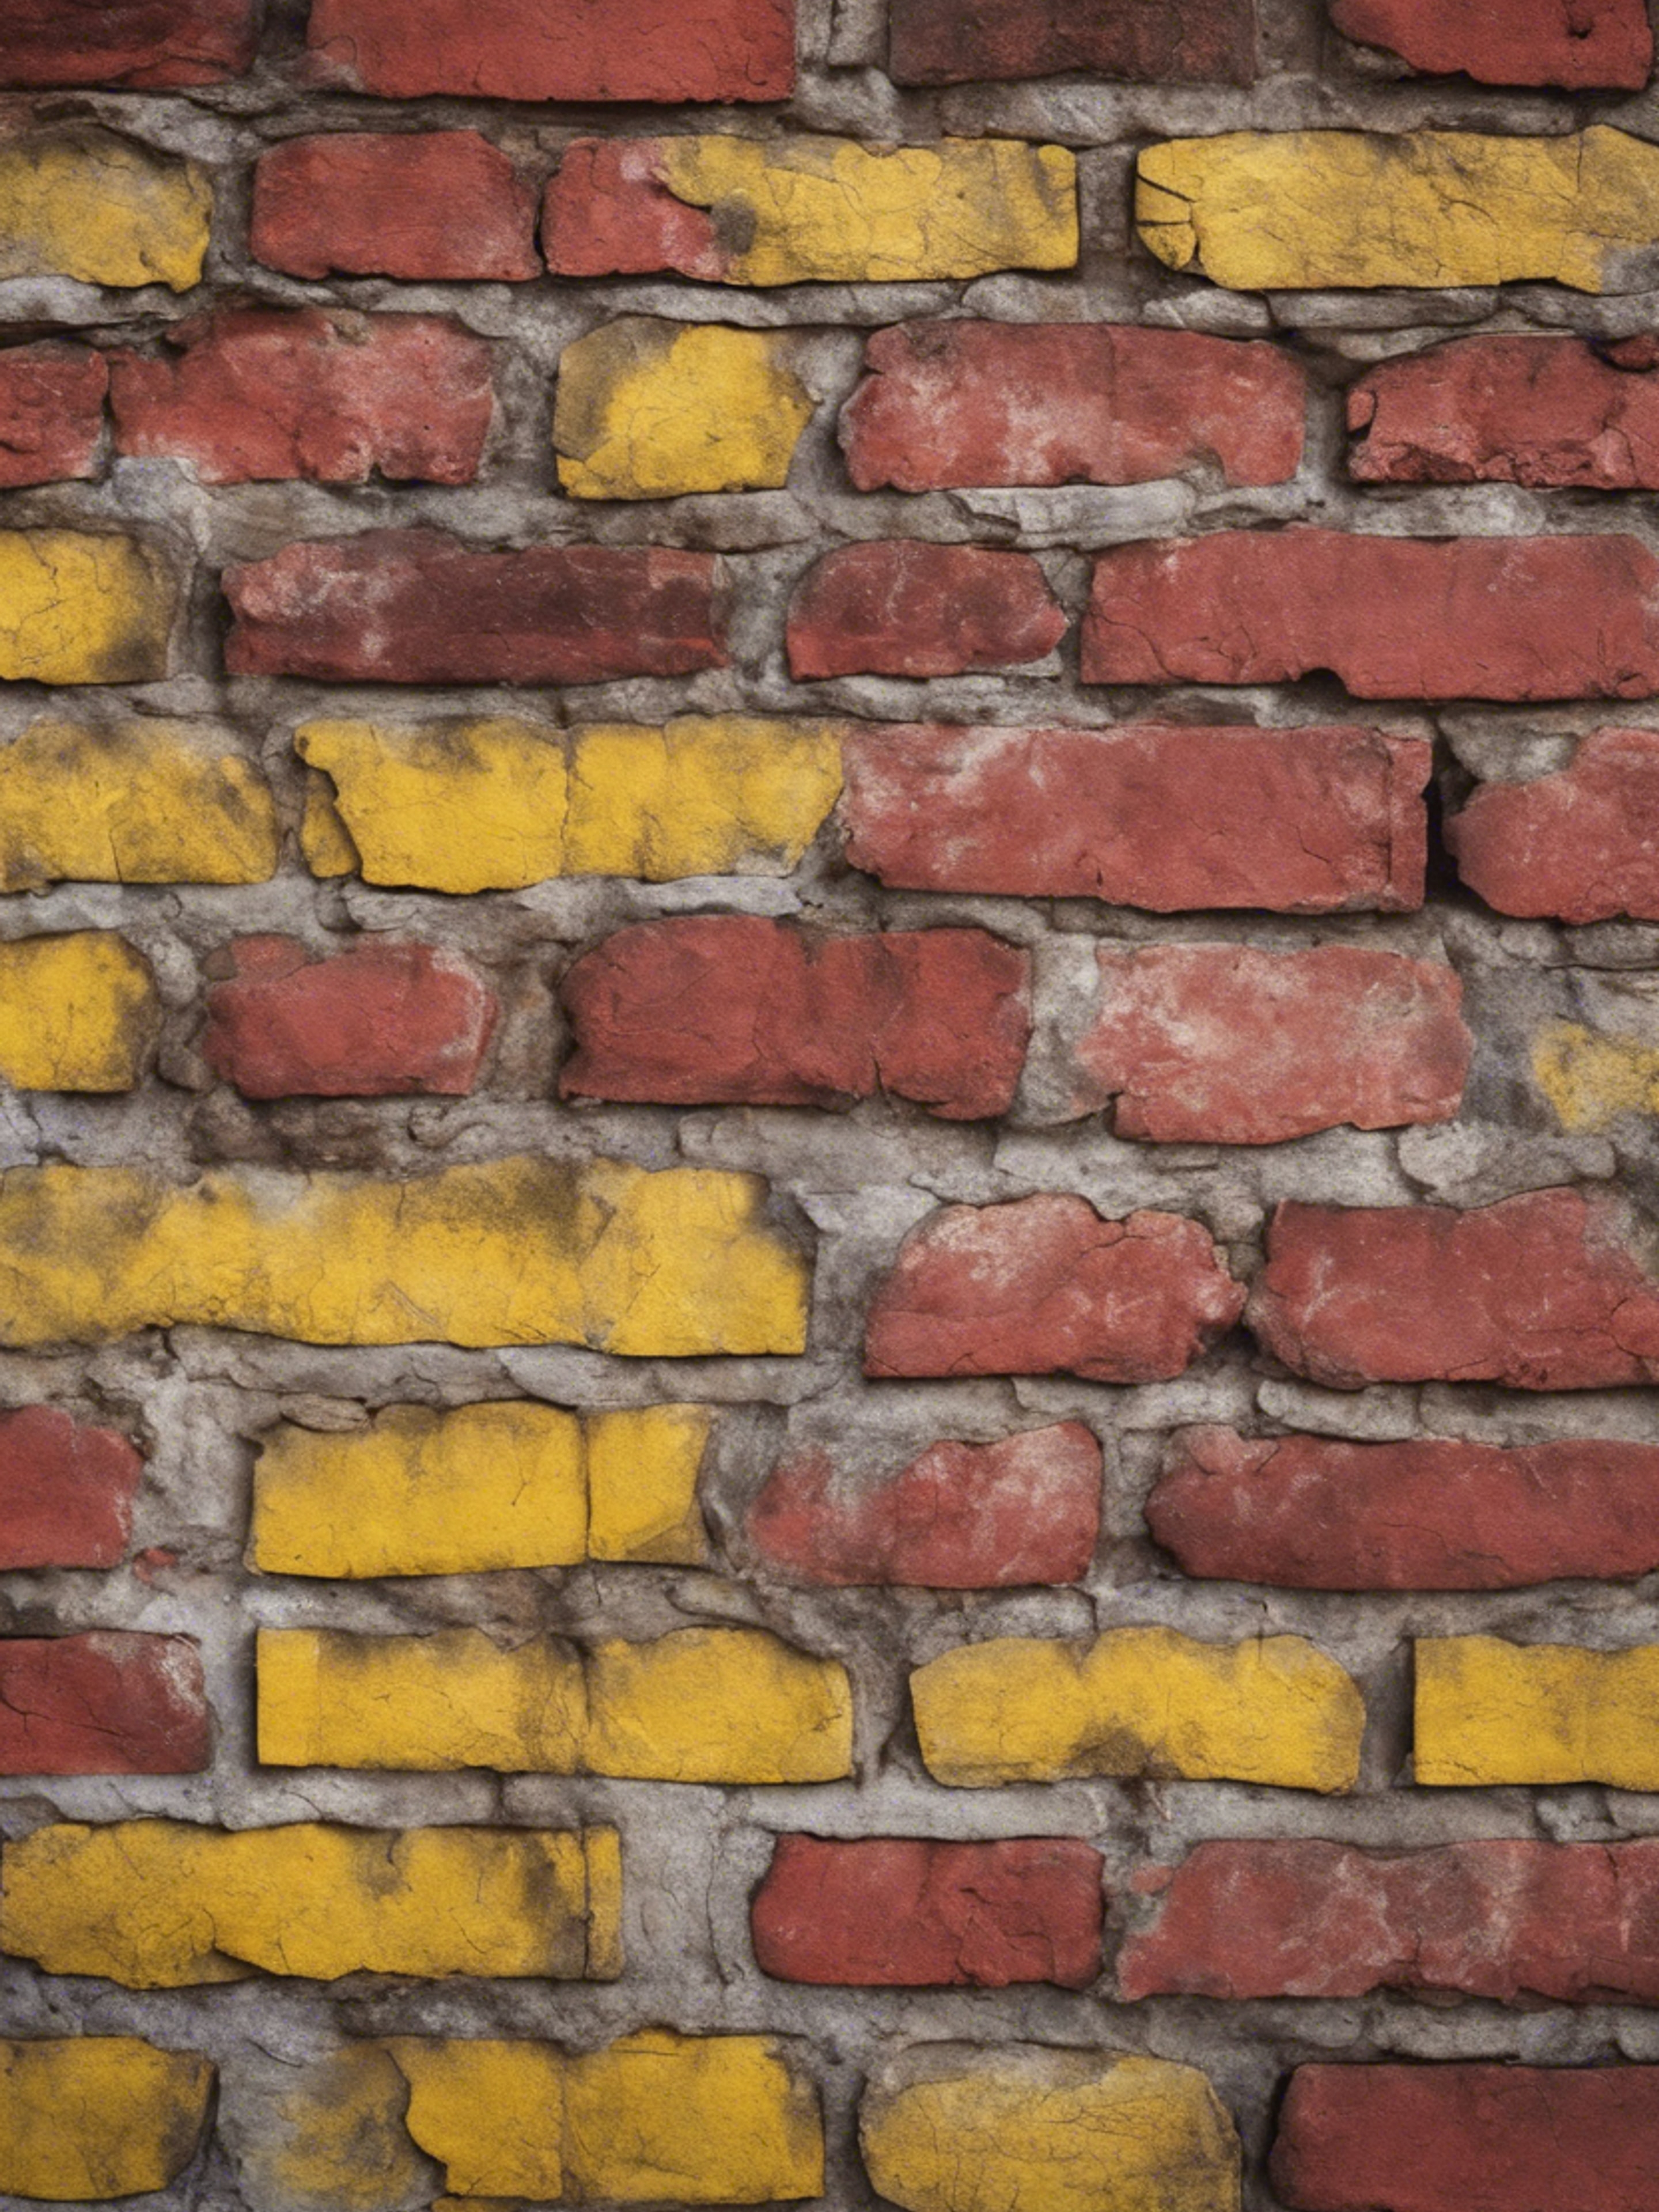 A weathered wall showing an aged interpretation of red and yellow brick pattern. Валлпапер[9de1dc722d5f4301b6ed]